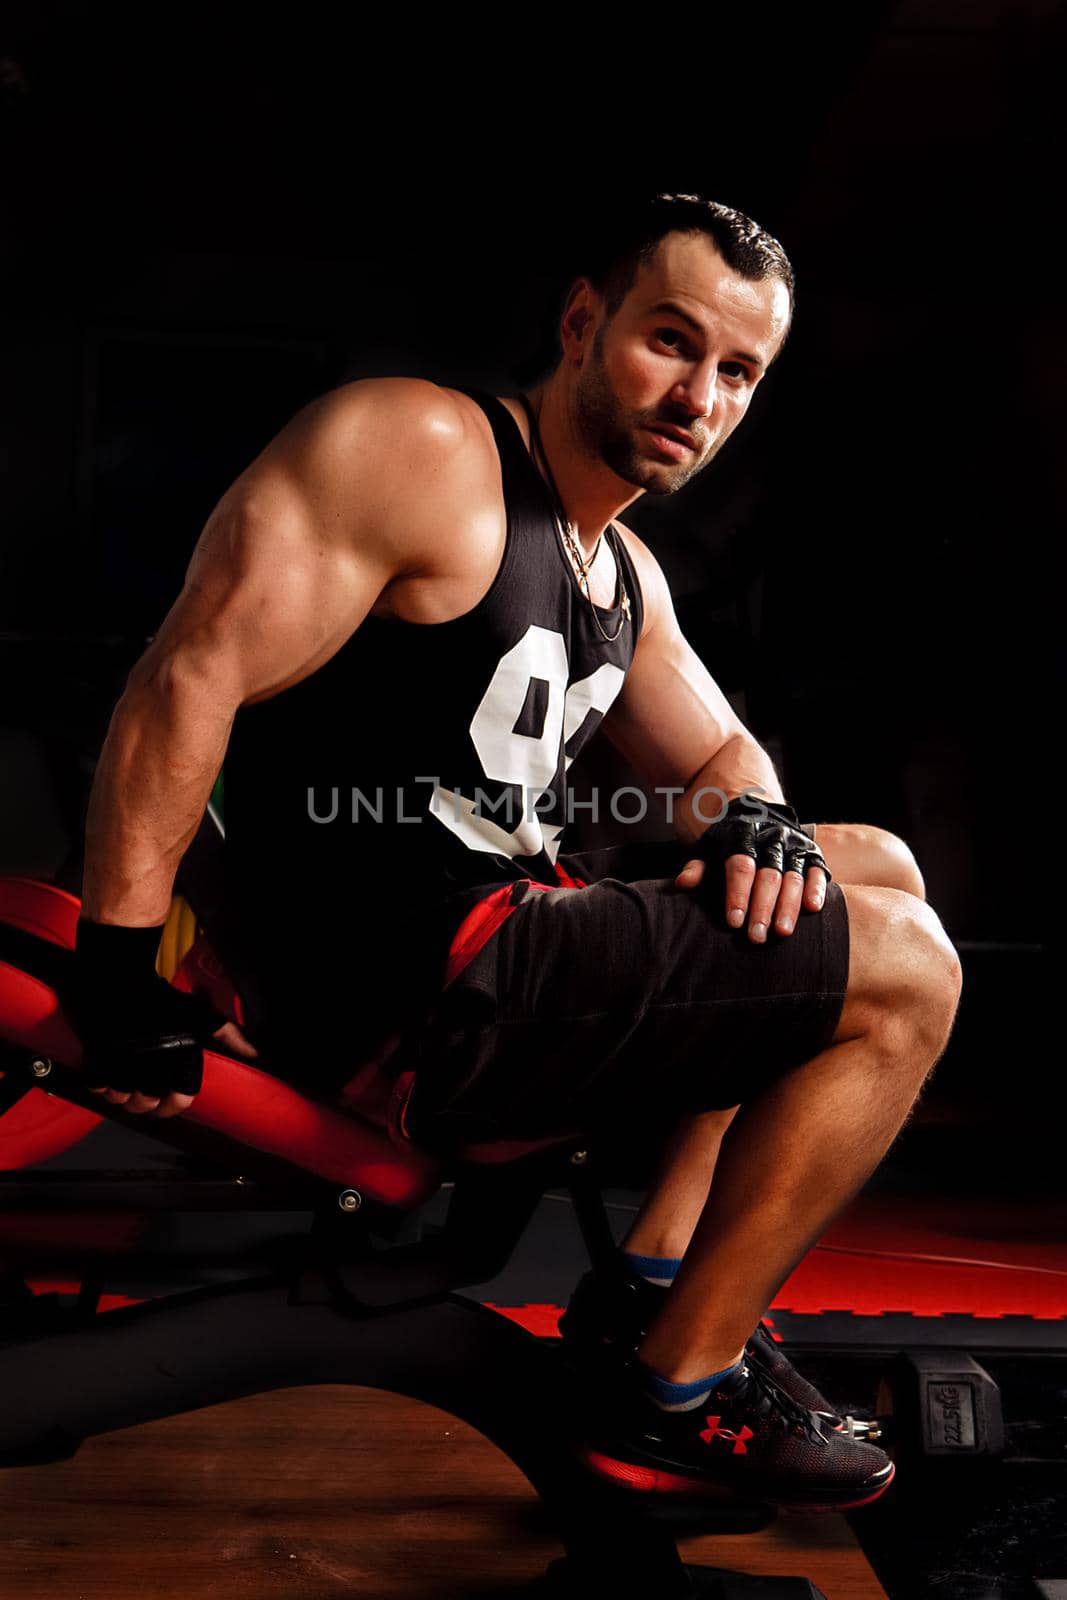 Close up portrait of a fit young man working out in sports simulators and looking at the camera on dark background